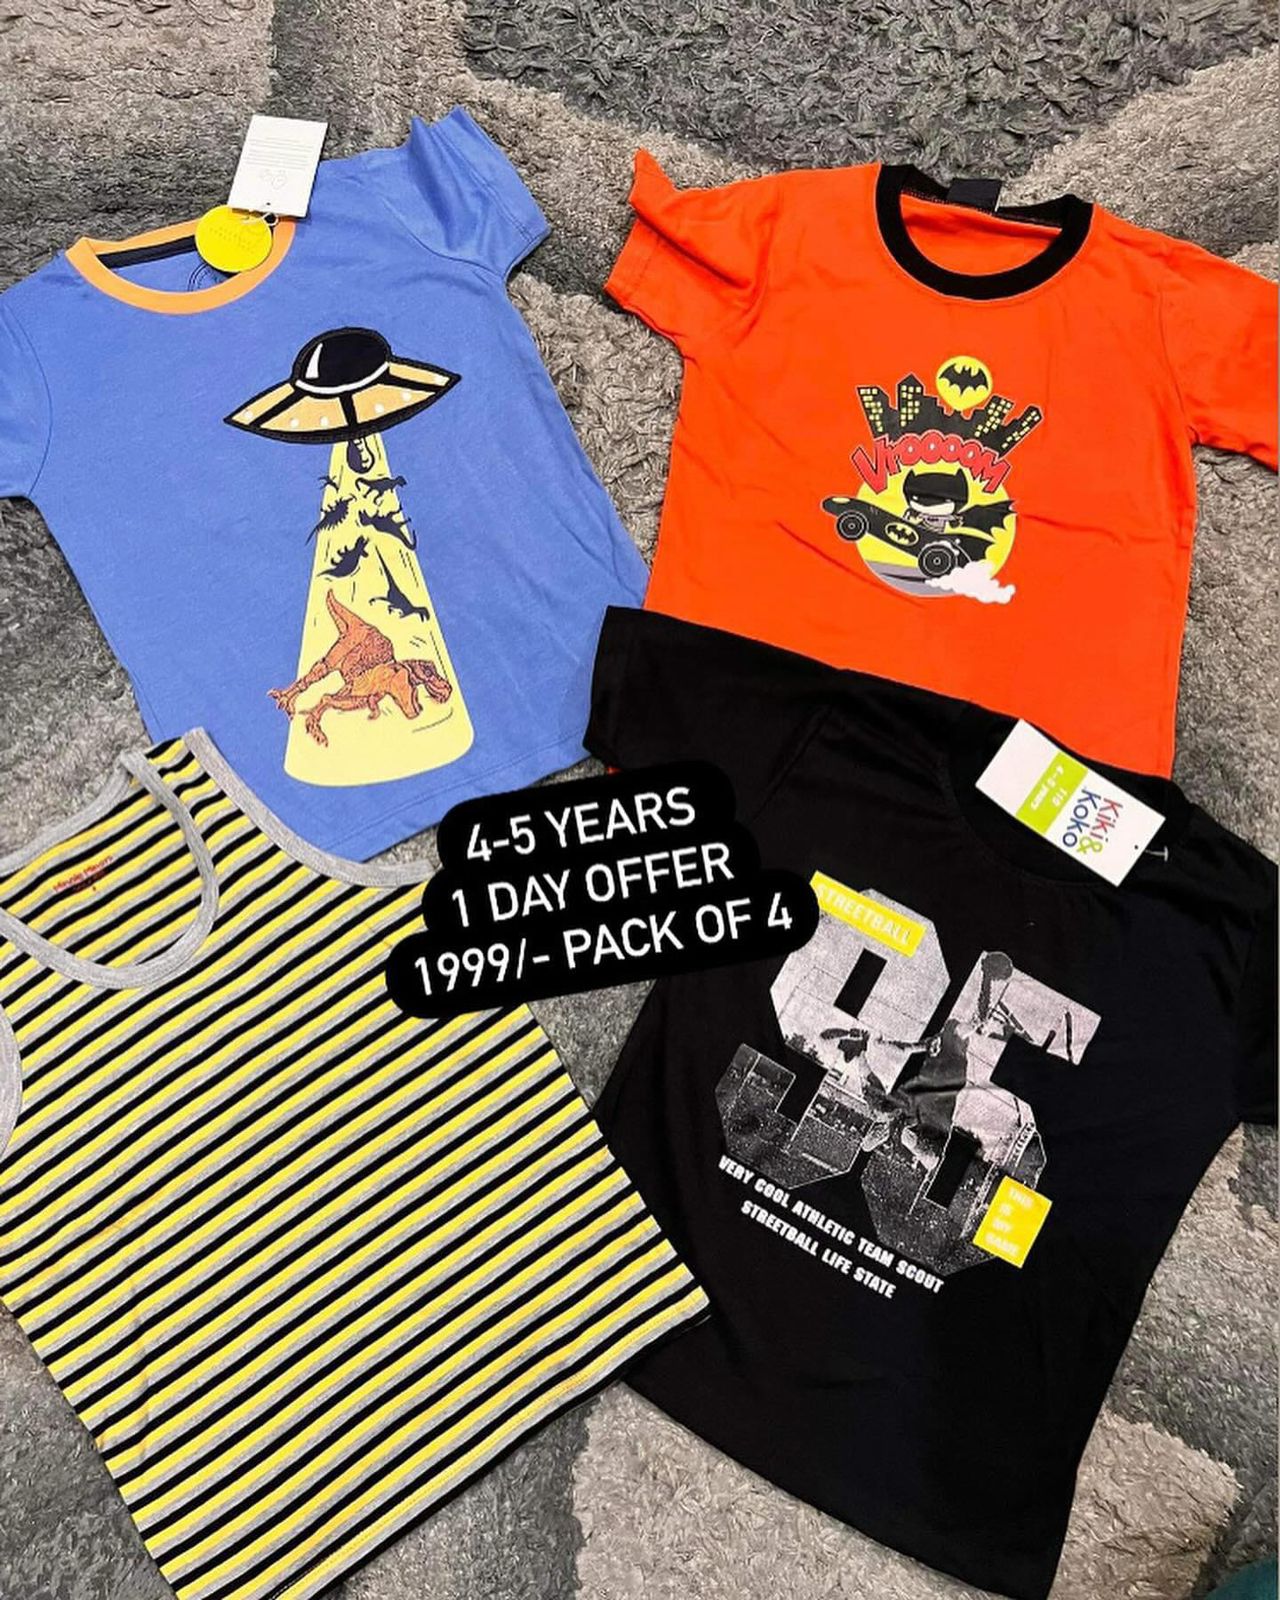 Kids Boys Summer Pack of 4 Branded Imported Shirts Pack 4-5 Year